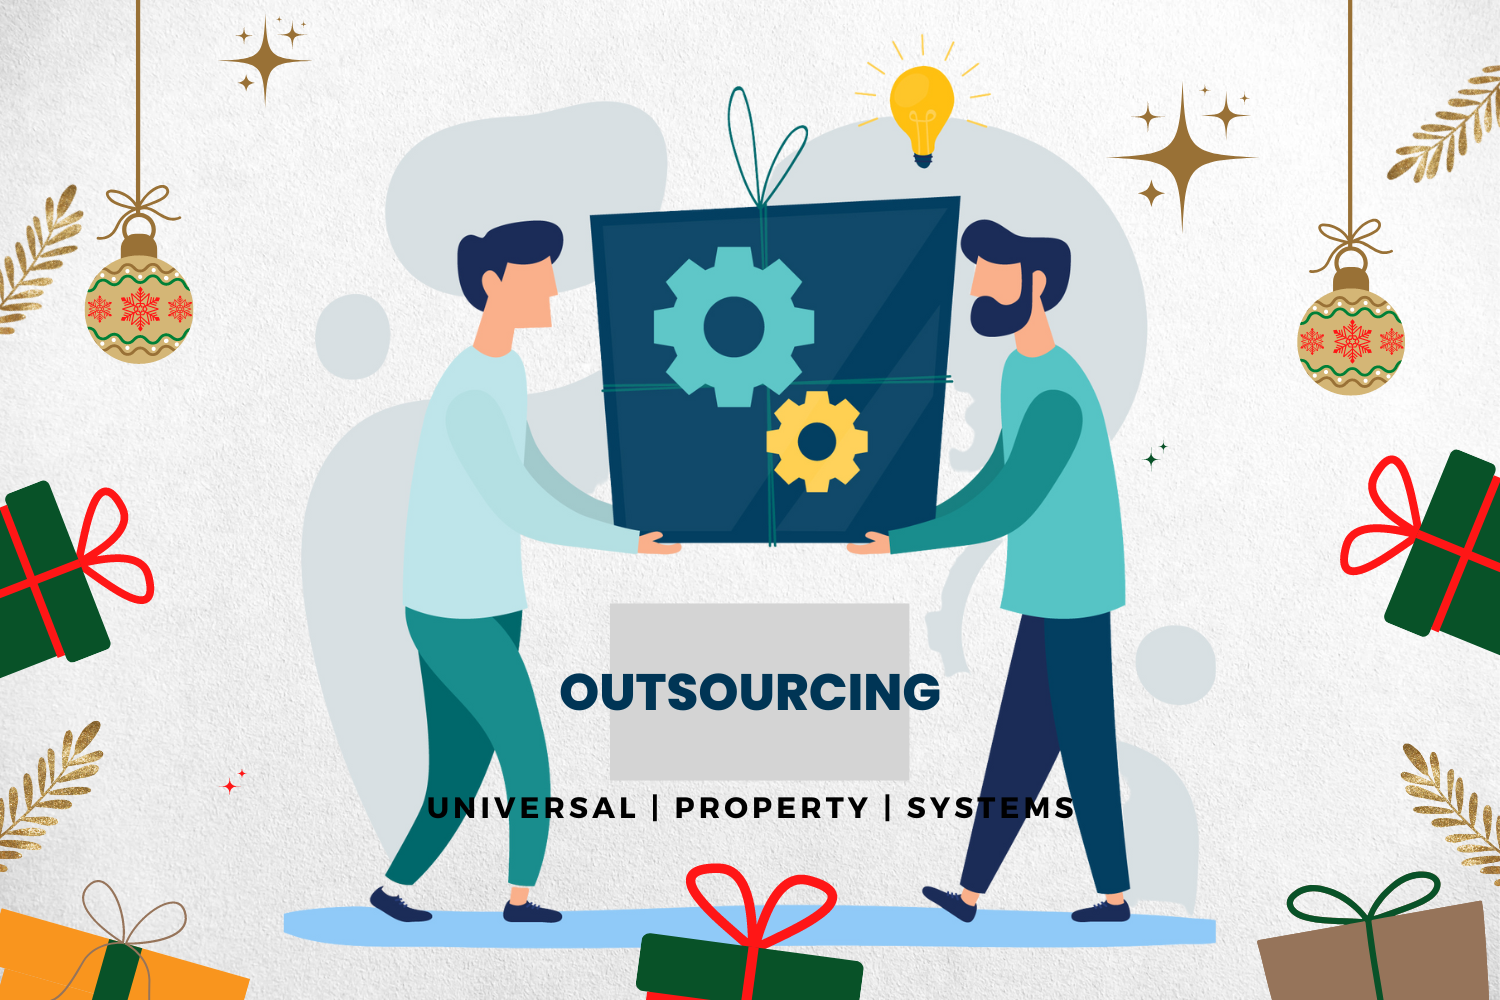 It's time to outsource